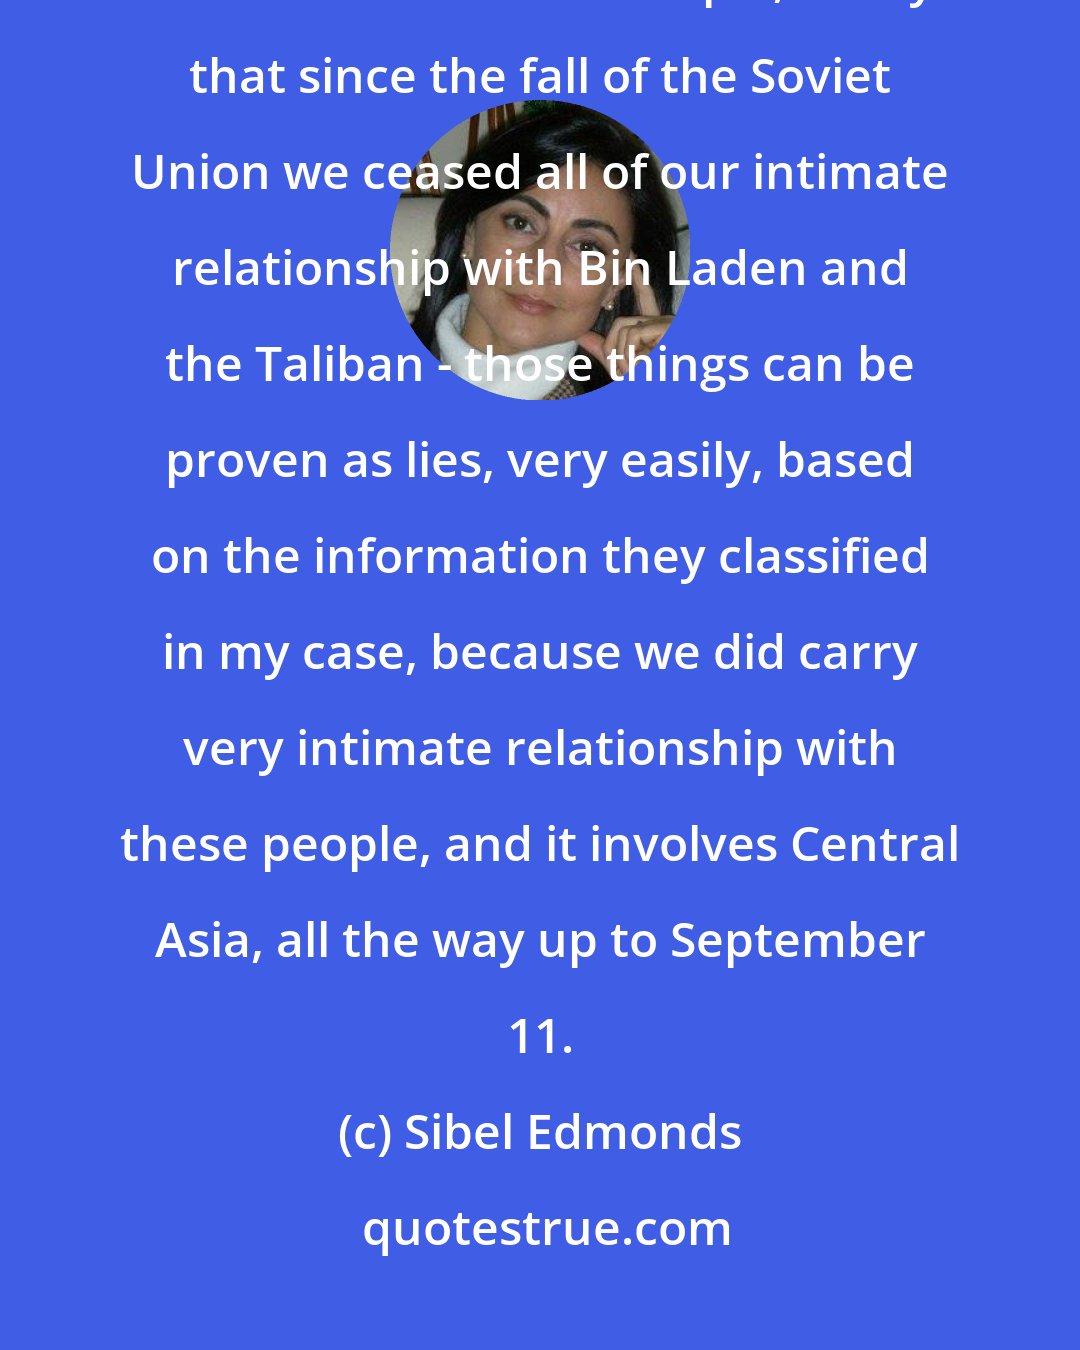 Sibel Edmonds: I have information about things that our government has lied to us about. I know. For example, to say that since the fall of the Soviet Union we ceased all of our intimate relationship with Bin Laden and the Taliban - those things can be proven as lies, very easily, based on the information they classified in my case, because we did carry very intimate relationship with these people, and it involves Central Asia, all the way up to September 11.